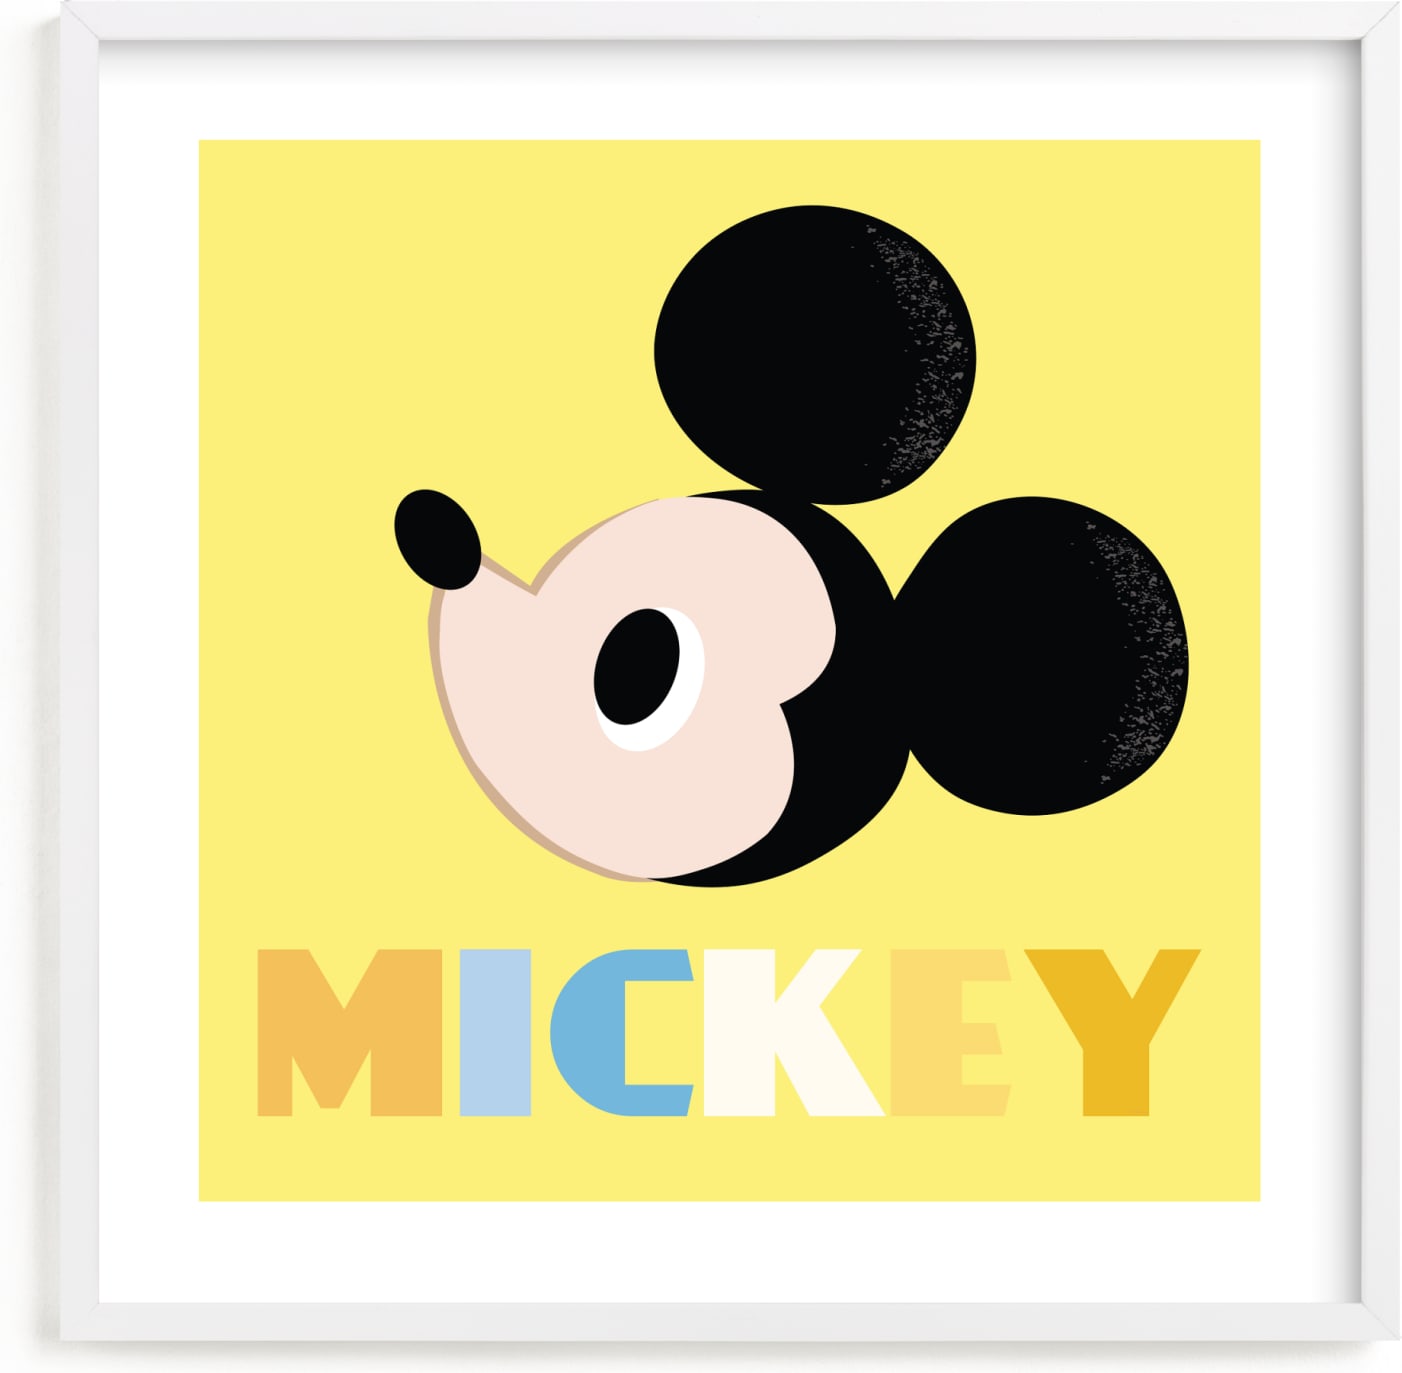 This is a blue, yellow, black disney art by Angela Thompson called Disney's Mickey Mouse.